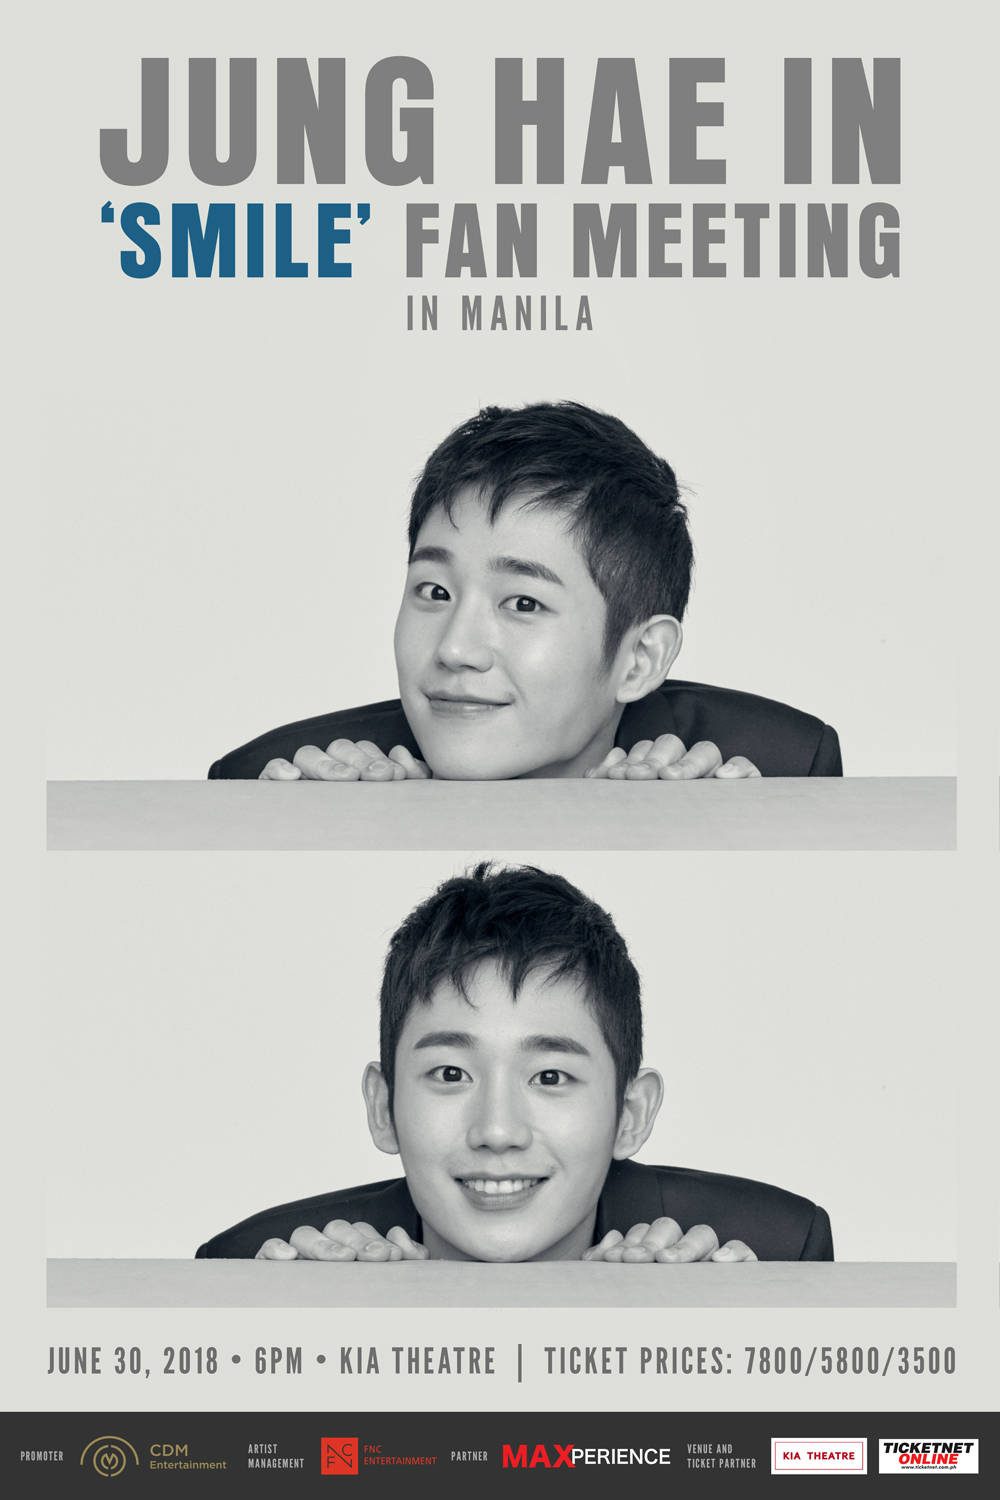 Korean actor Jung Hae-in is coming to Manila!